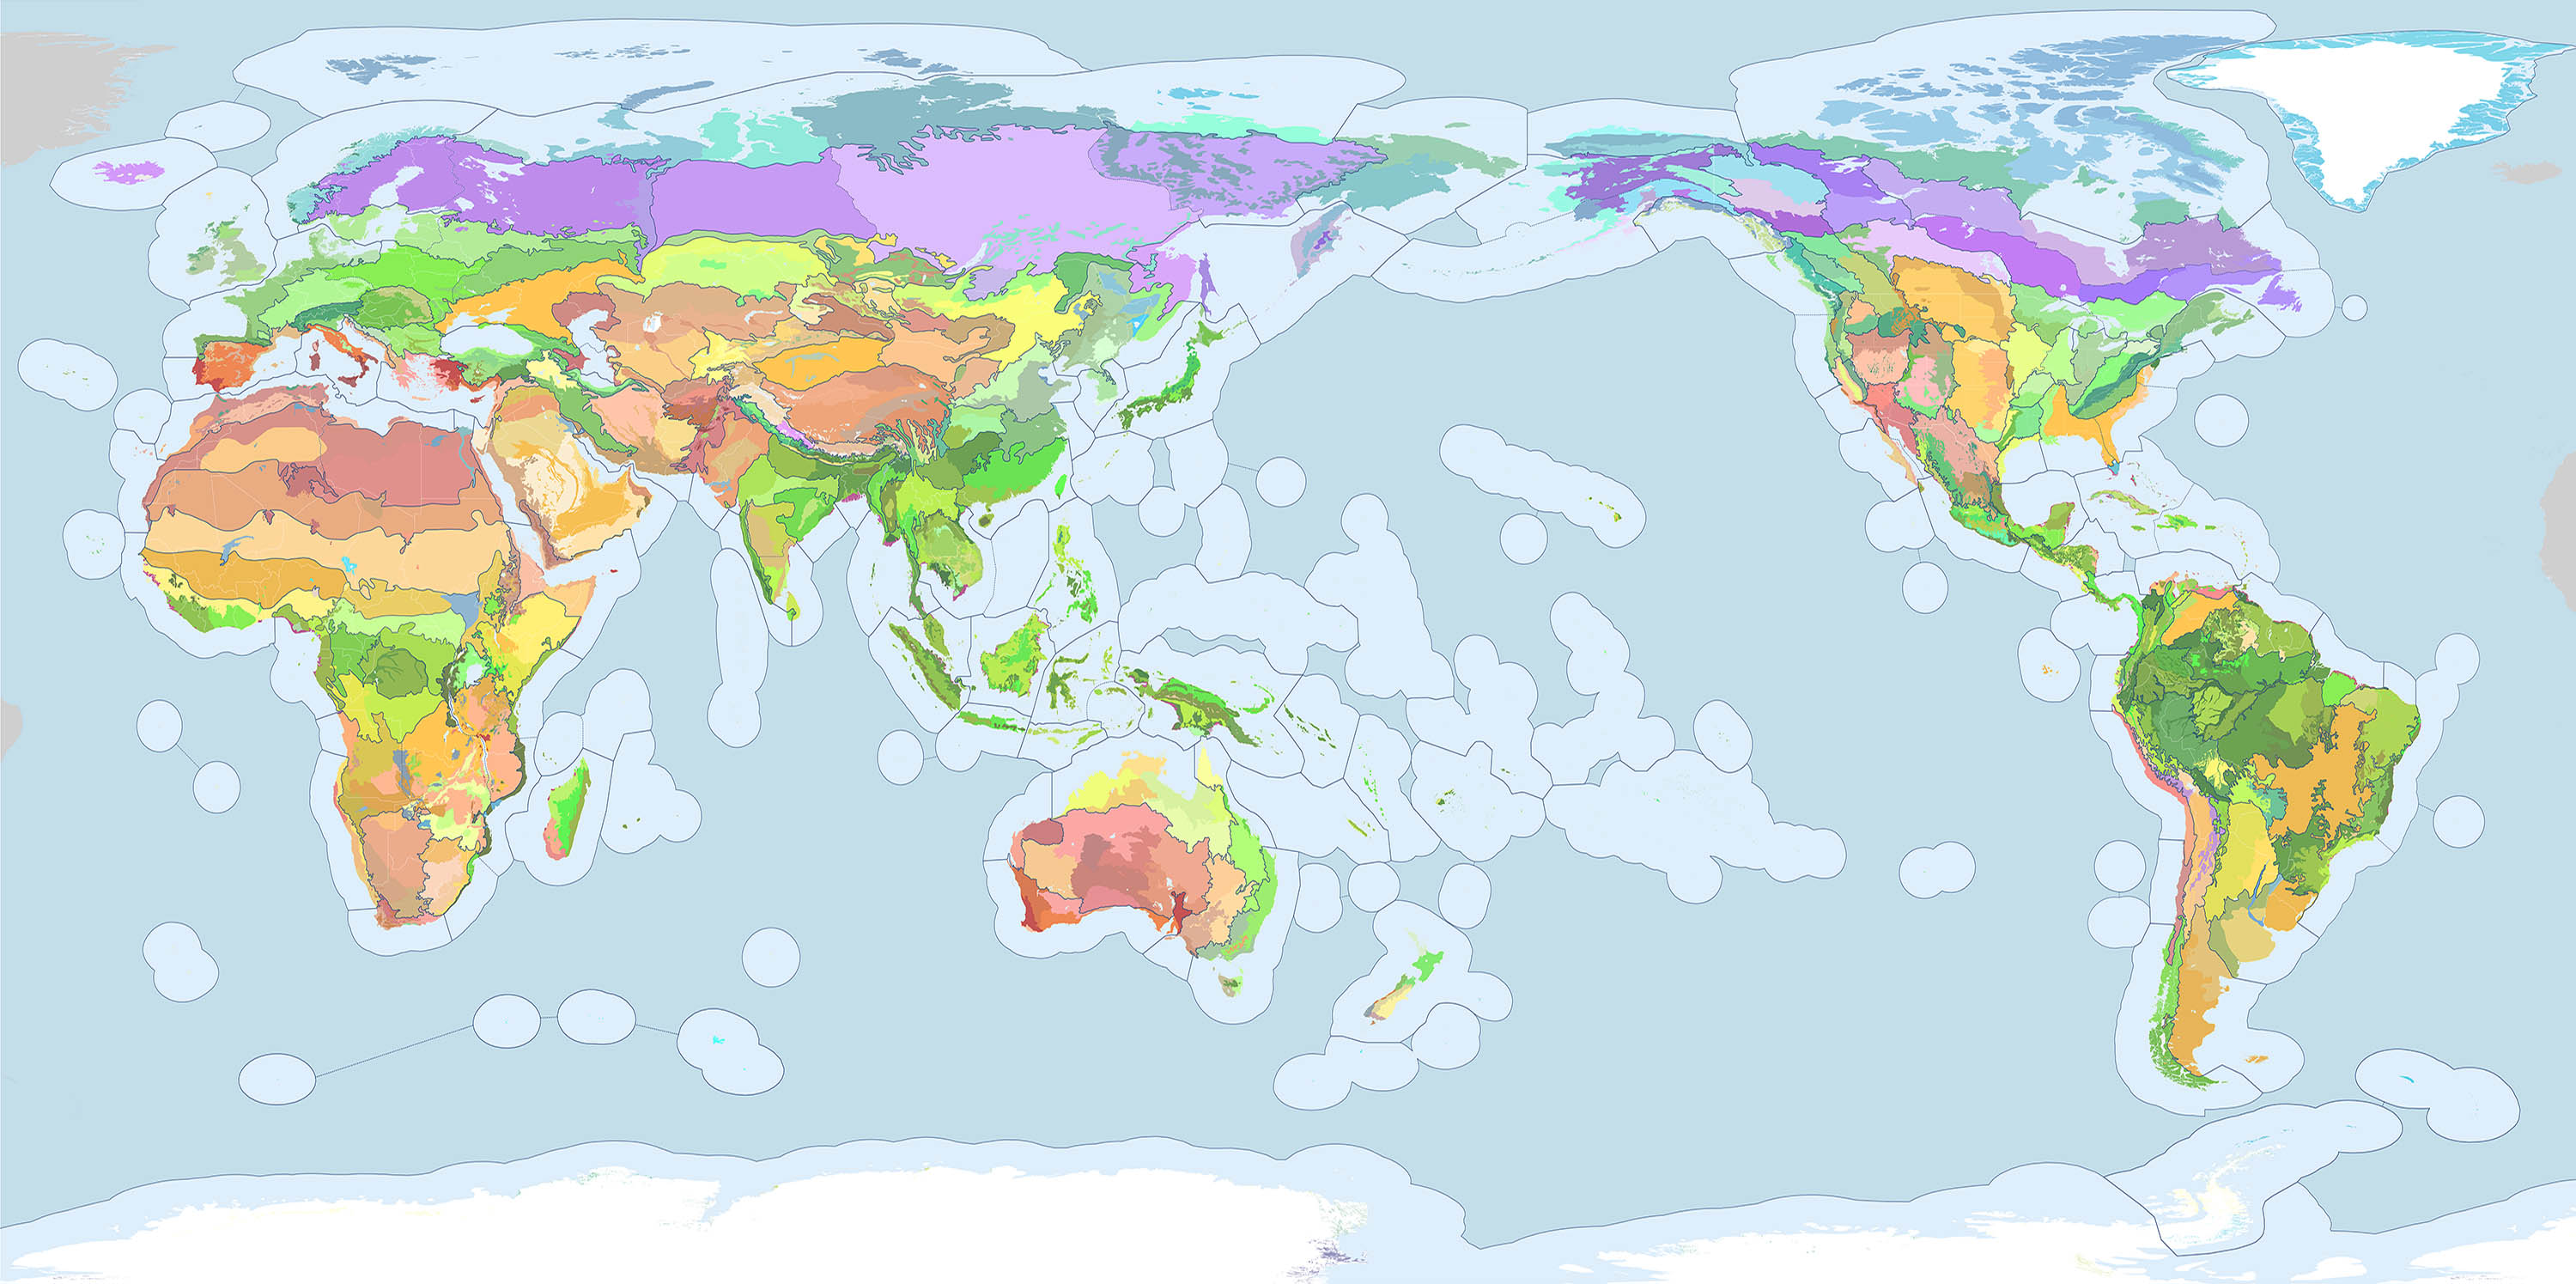 The 844 terrestrial ecoregions of the Earth (Dinerstein et al. 2017) overlayed with One Earth's Bioregions polygons. A finite number of ecoregions are nested within each bioregion.